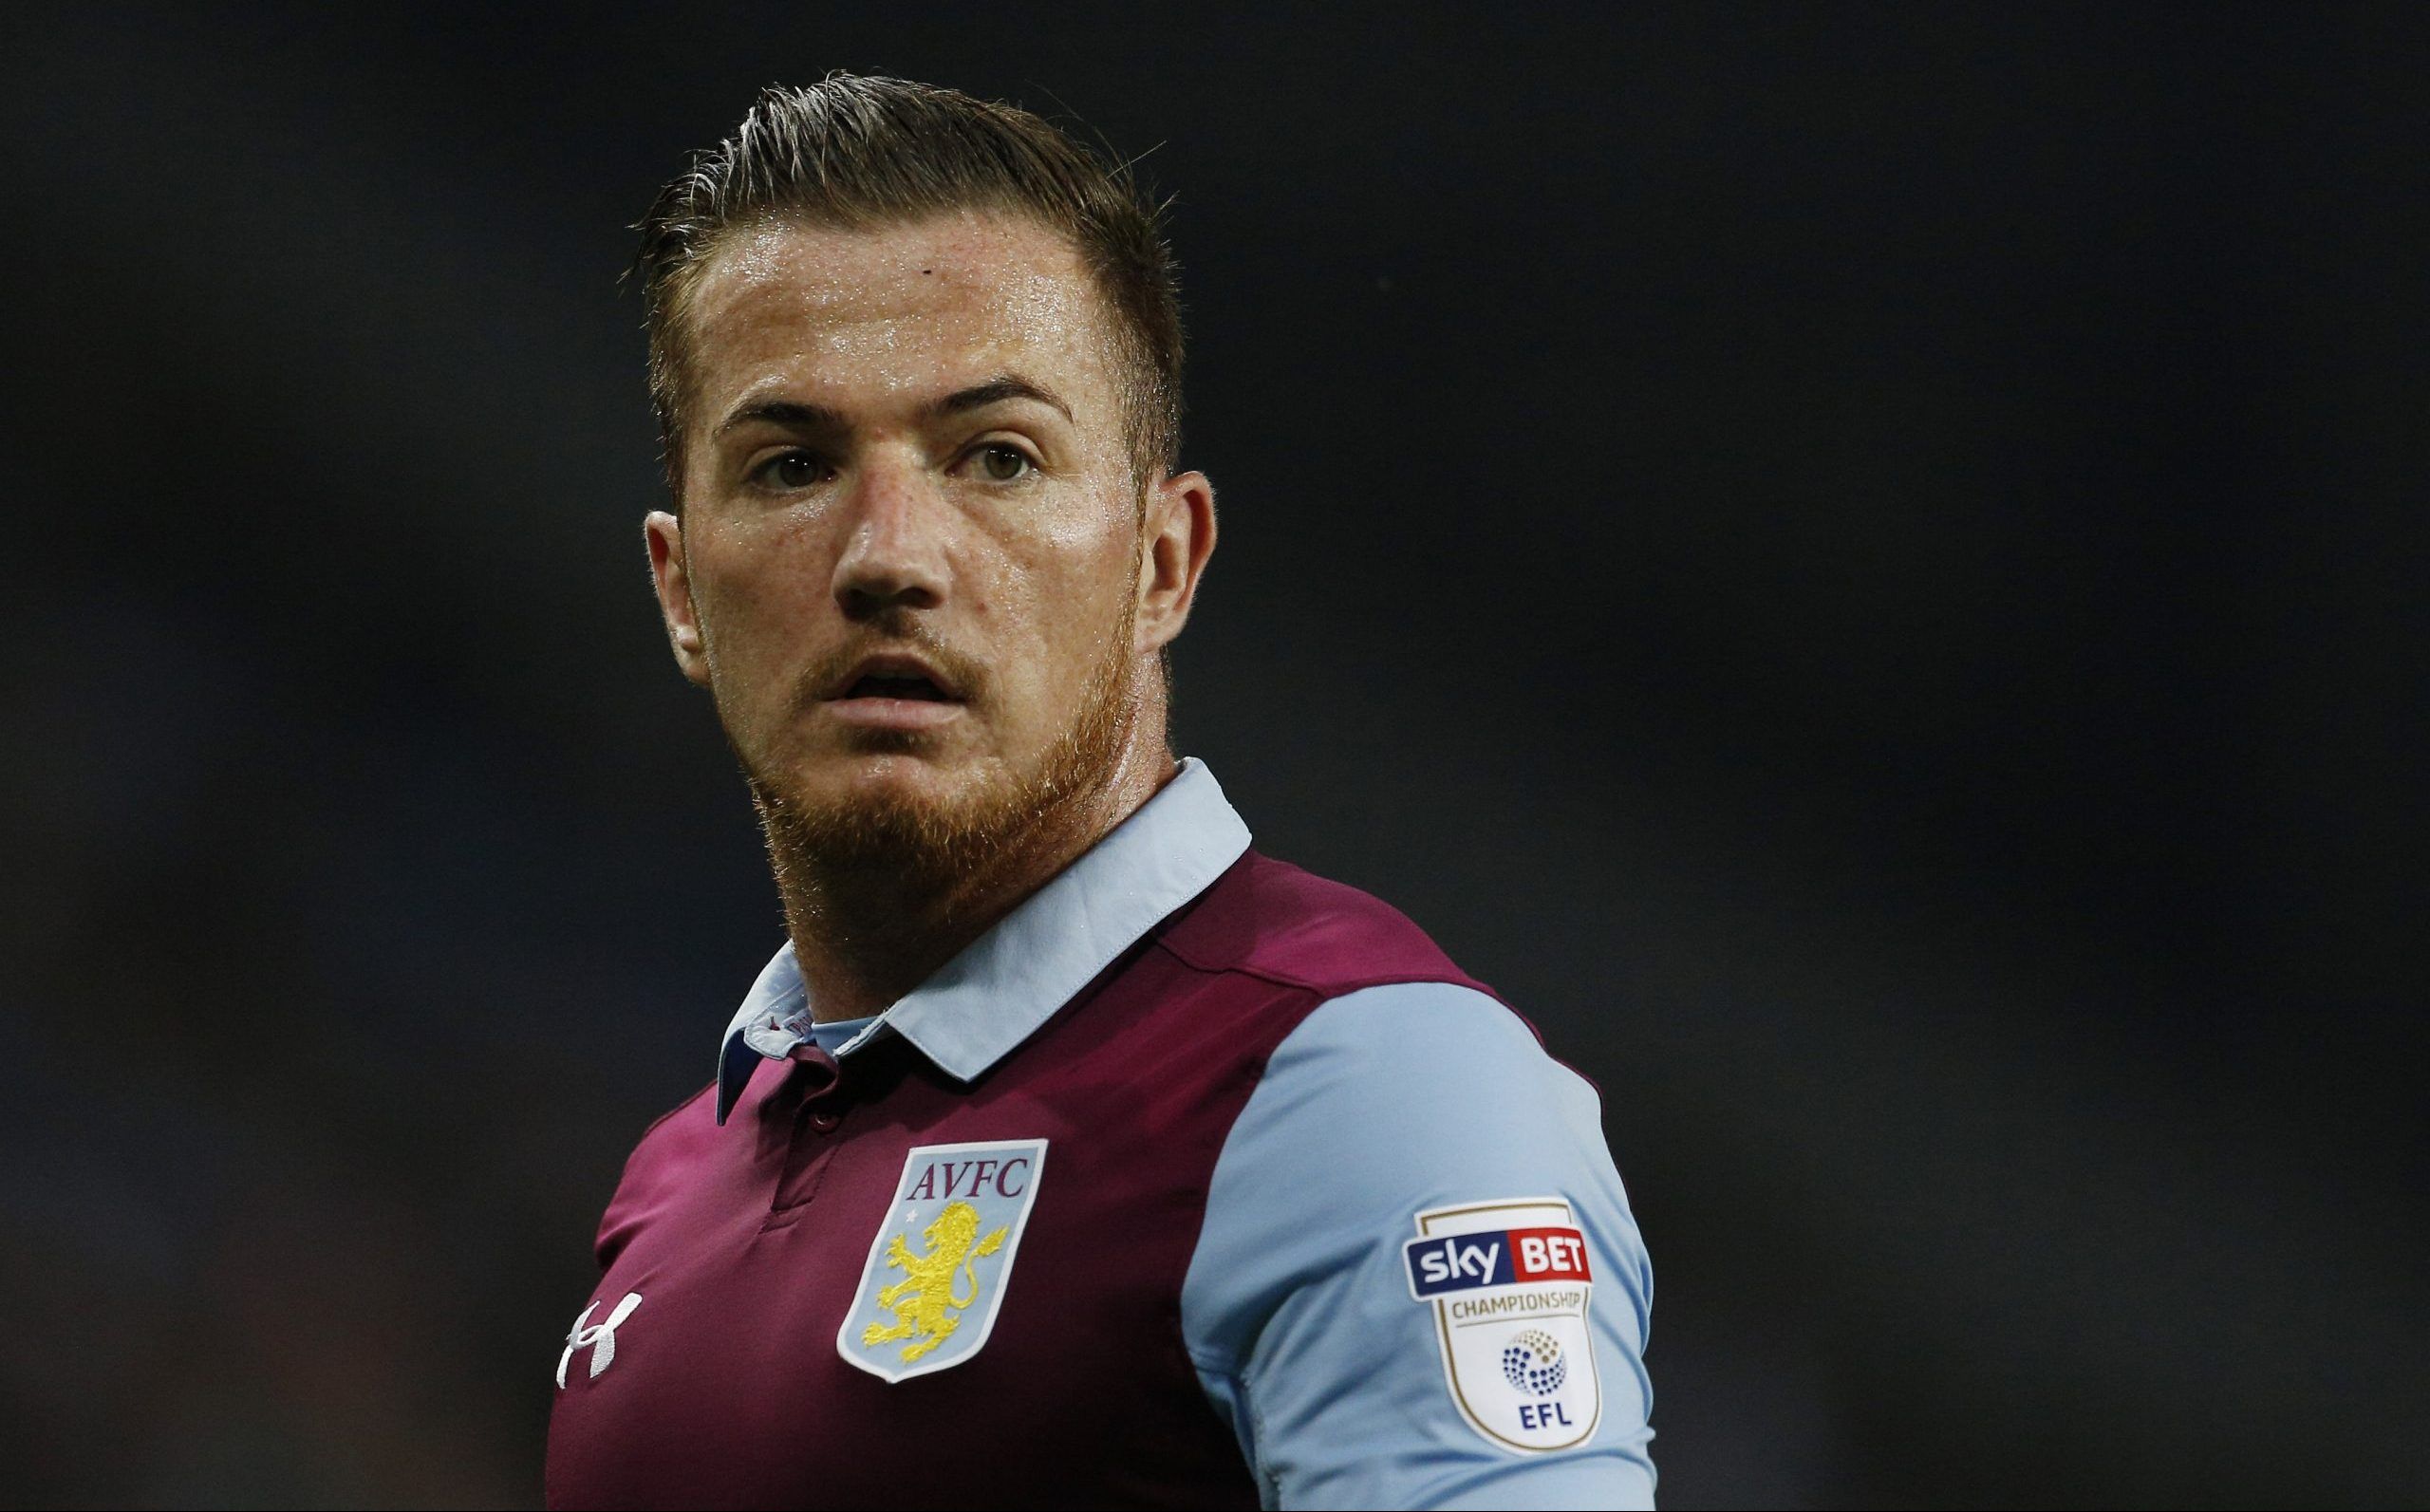 Britain Soccer Football - Aston Villa v Brentford - Sky Bet Championship - Villa Park - 16/17 -14/9/16
Aston Villa's Ross McCormack
Mandatory Credit: Action Images / Craig Brough

EDITORIAL USE ONLY. No use with unauthorized audio, video, data, fixture lists, club/league logos or 